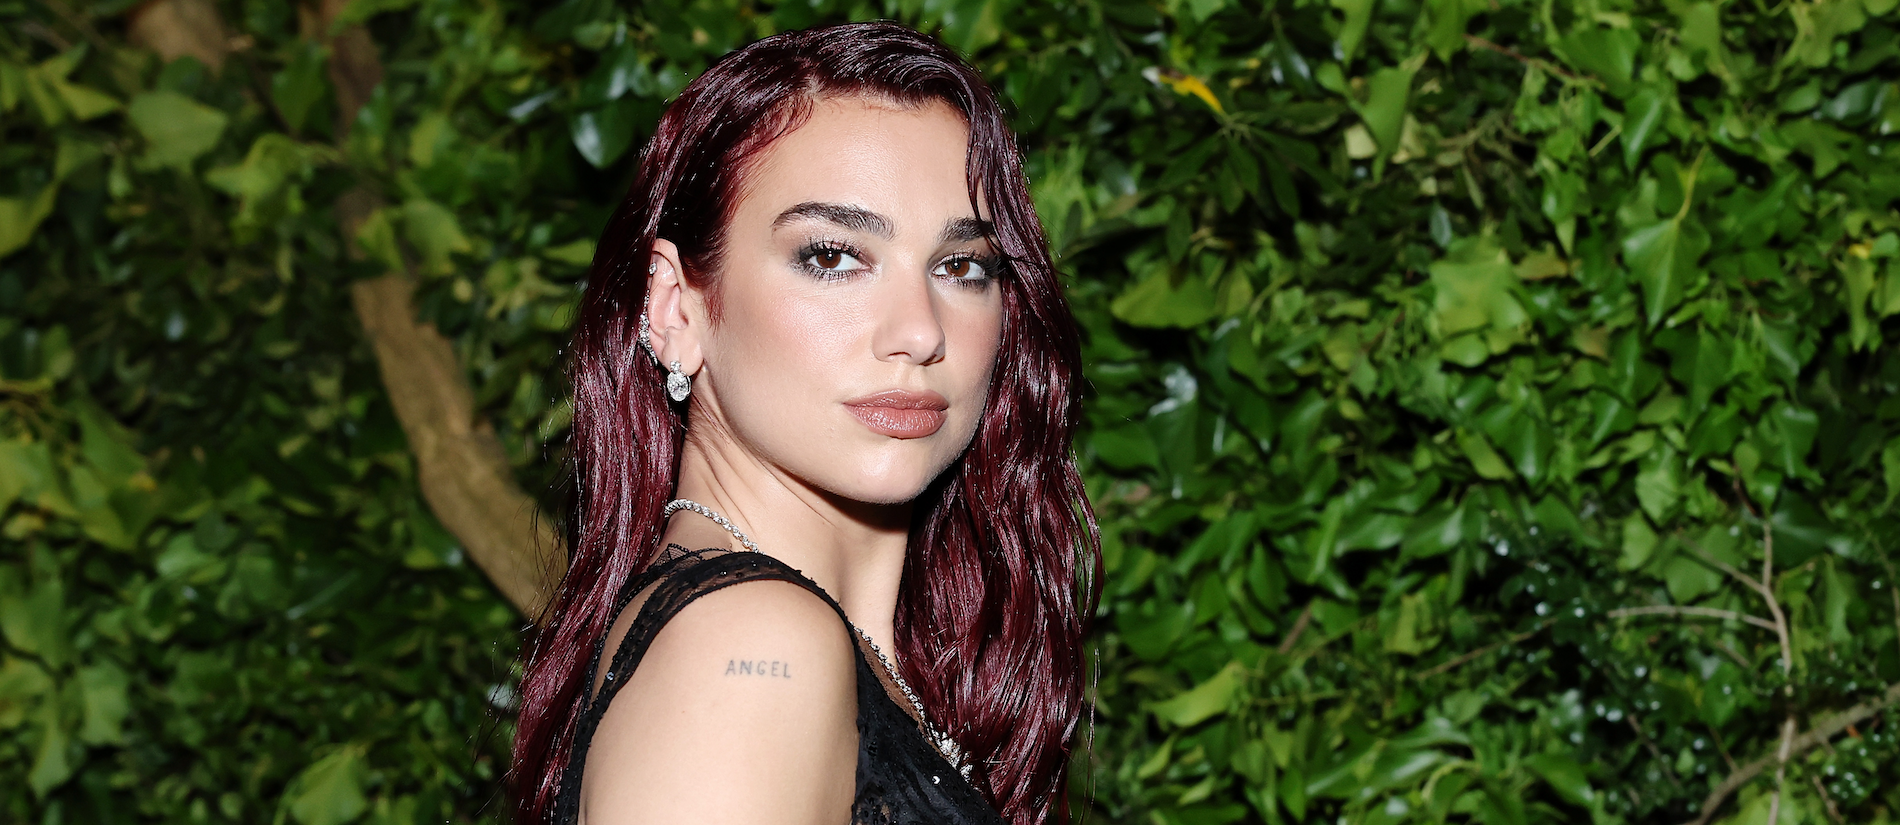 Austin City Limits Has Tapped Dua Lipa, Tyler The Creator, And More To